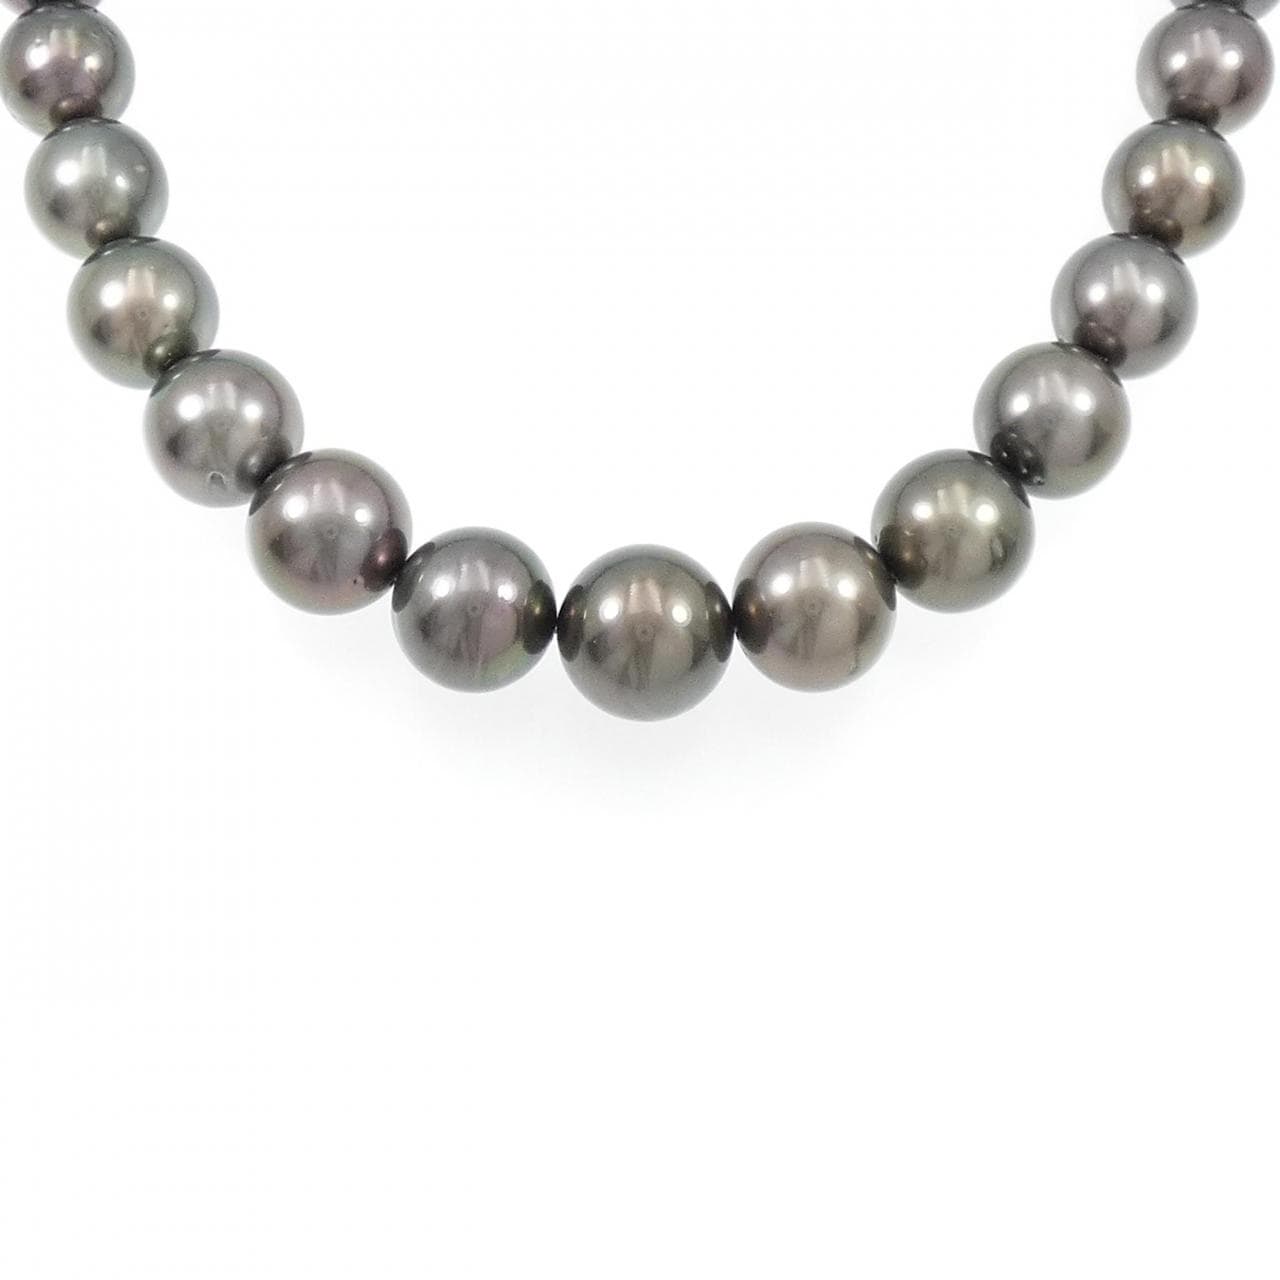 Silver clasp/K14WG black pearl necklace 8-11mm earring set